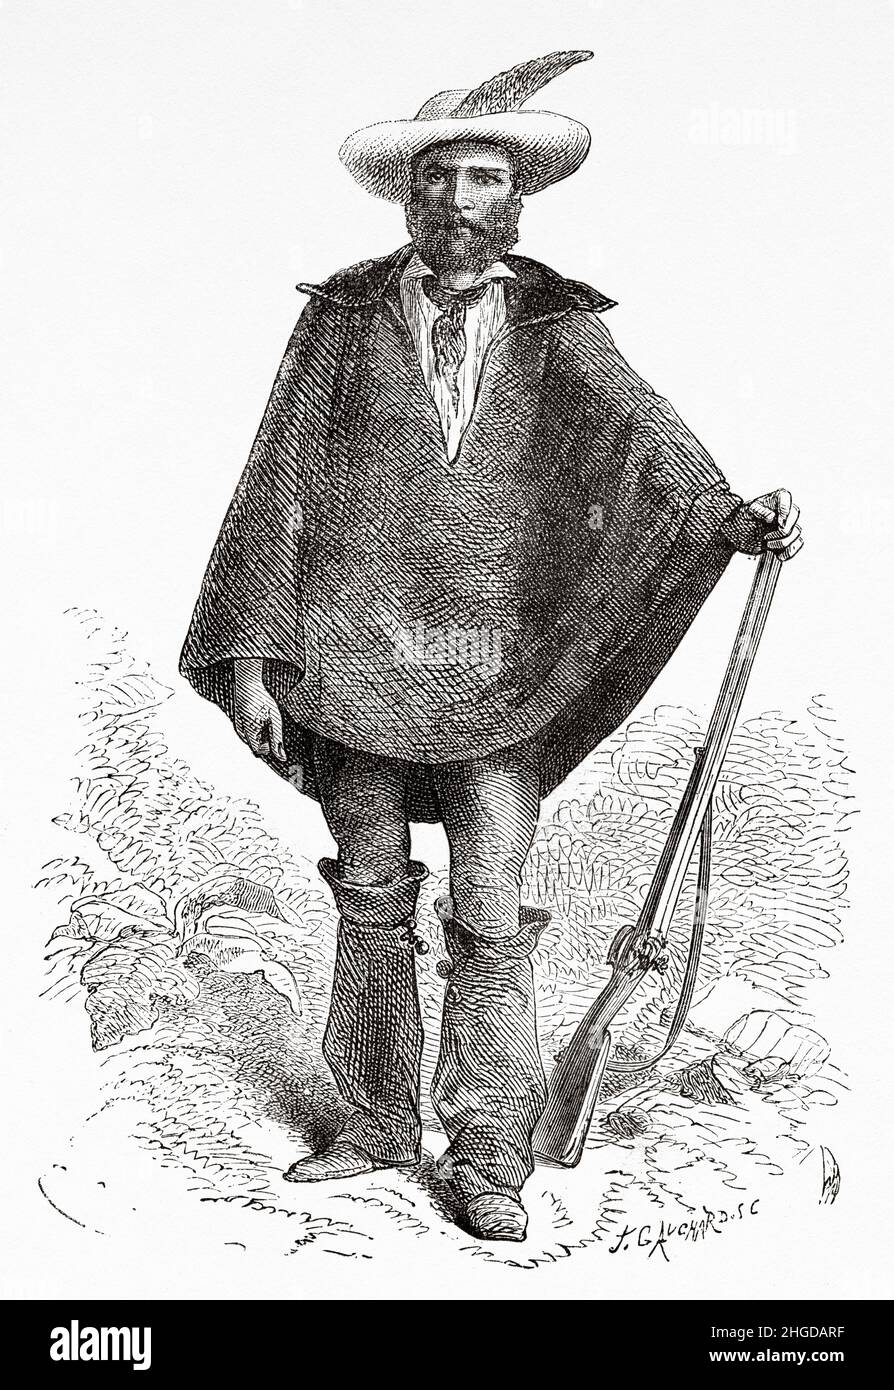 Portrait of a tracker, southern Peru. South America. Old 19th century engraved illustration from Journey across South America by Paul Marcoy, Le Tour du Monde 1870 Stock Photo